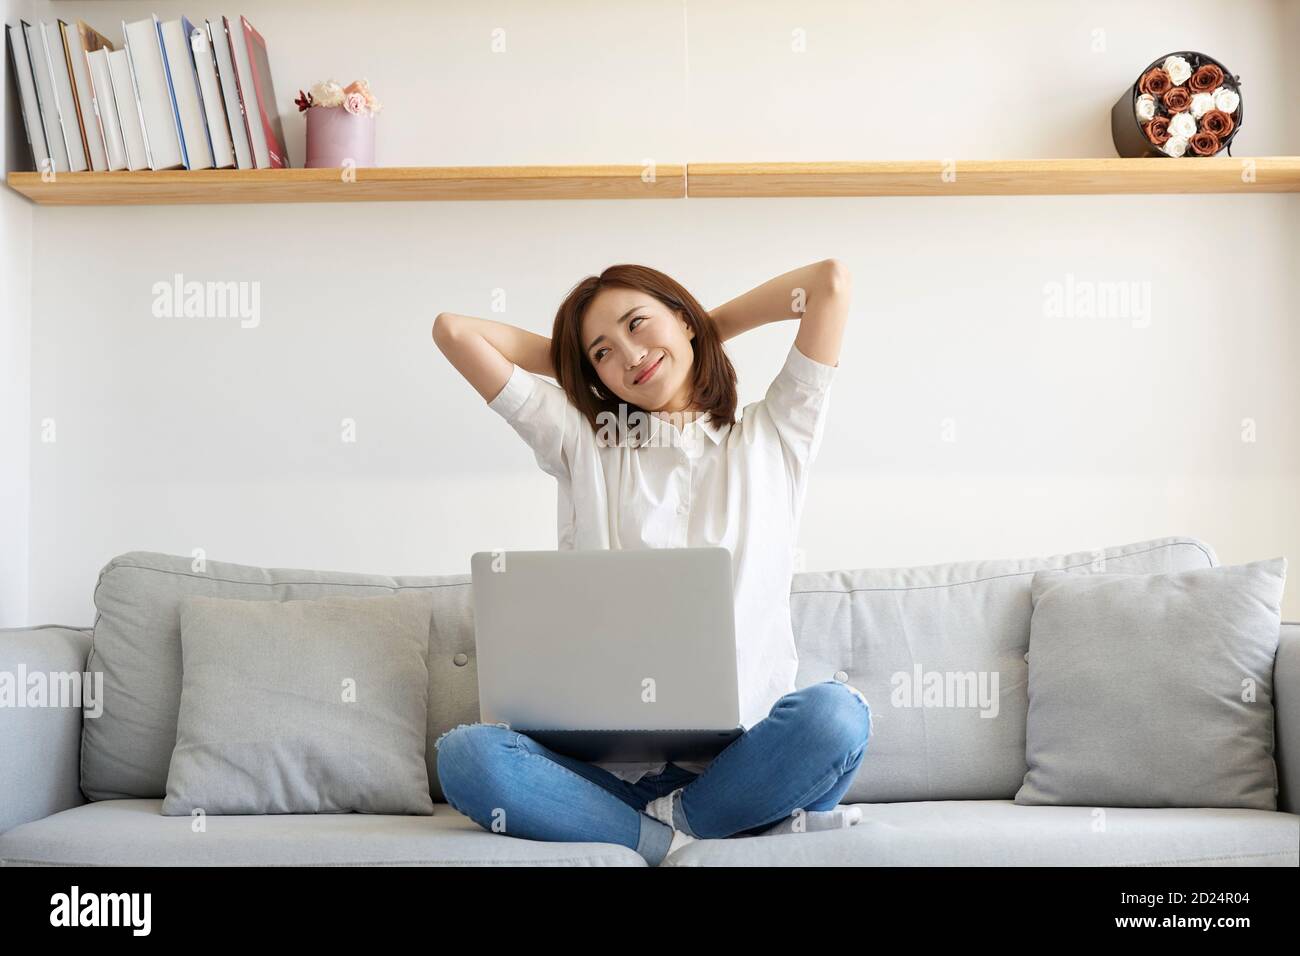 young asian business woman working from home sitting on couch stretching arms happy and smiling Stock Photo